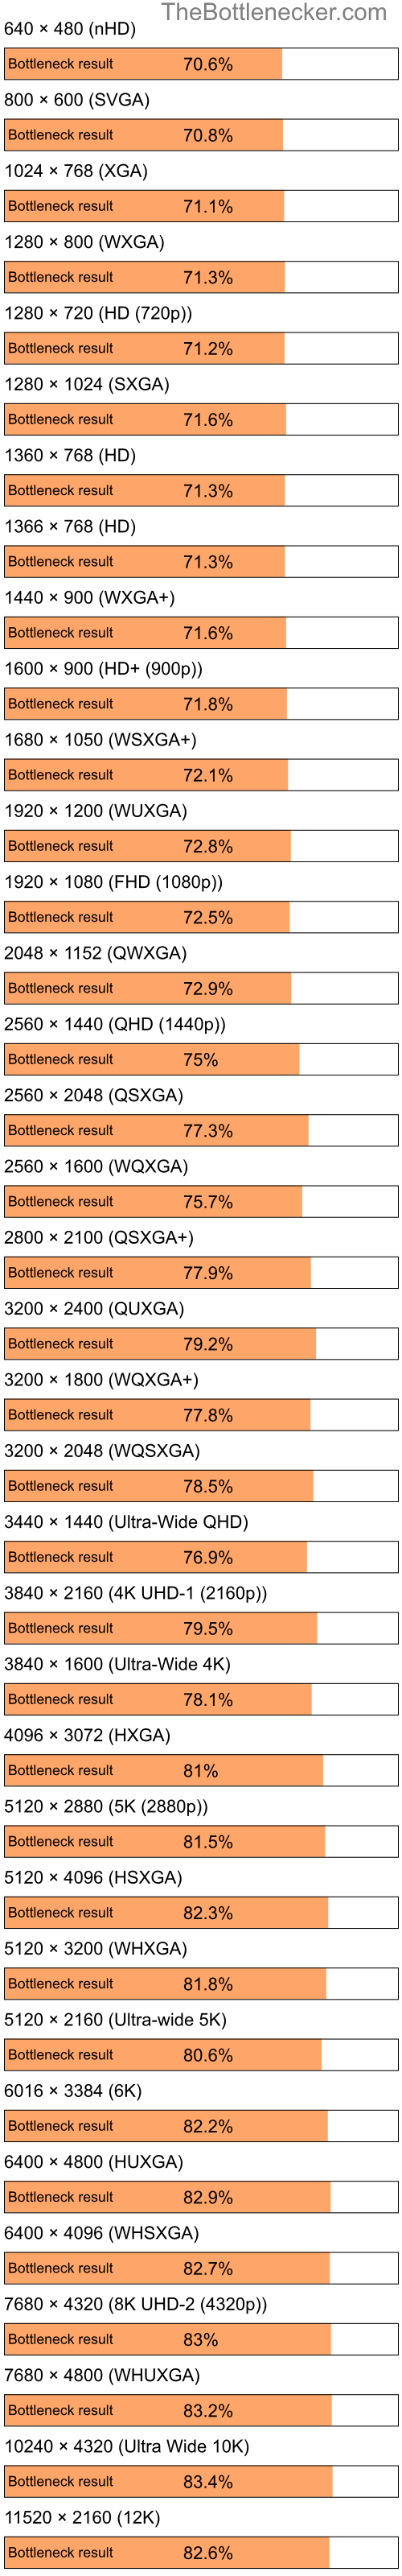 Bottleneck results by resolution for Intel Celeron and NVIDIA GeForce 7300 LE in Graphic Card Intense Tasks